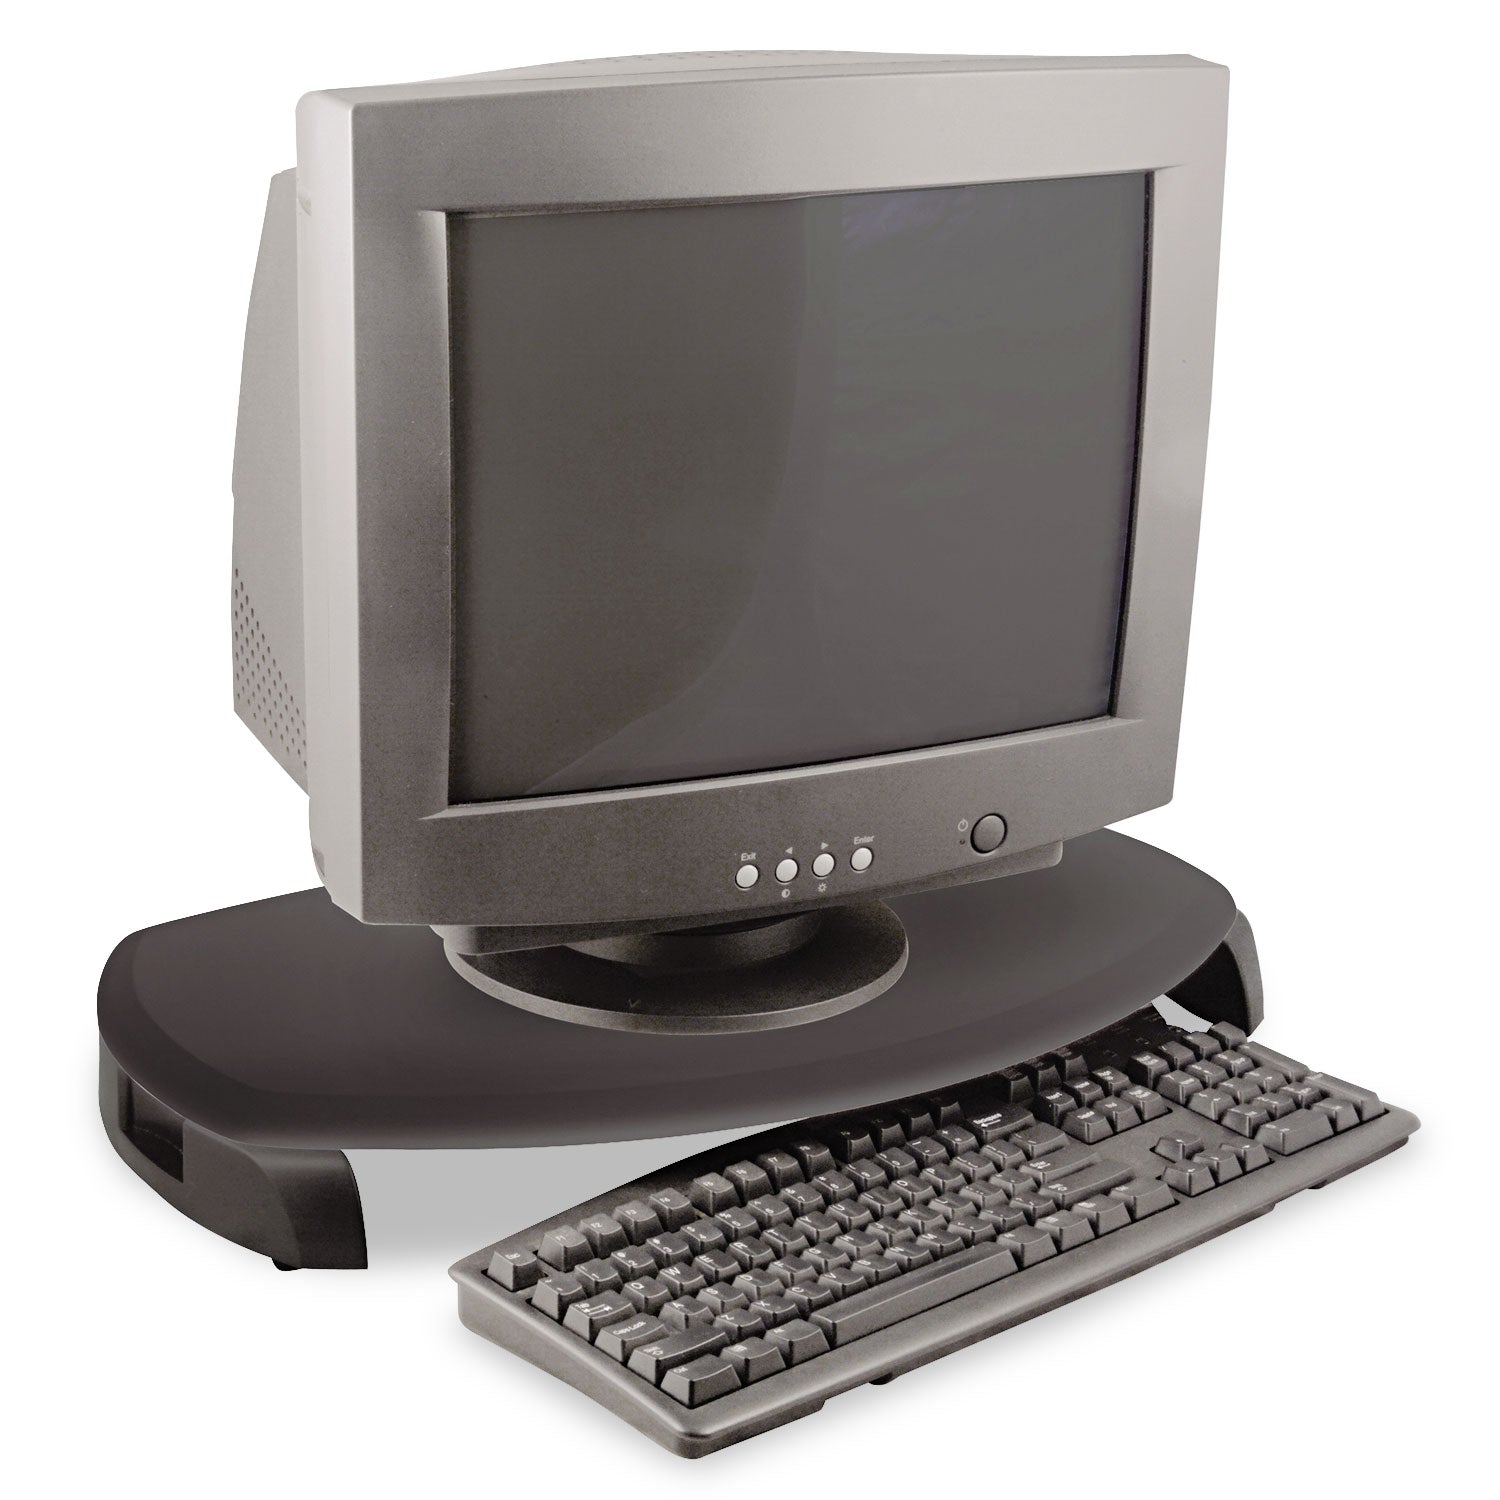 CRT/LCD Stand with Keyboard Storage, 23" x 13.25" x 3", Black, Supports 80 lbs - 